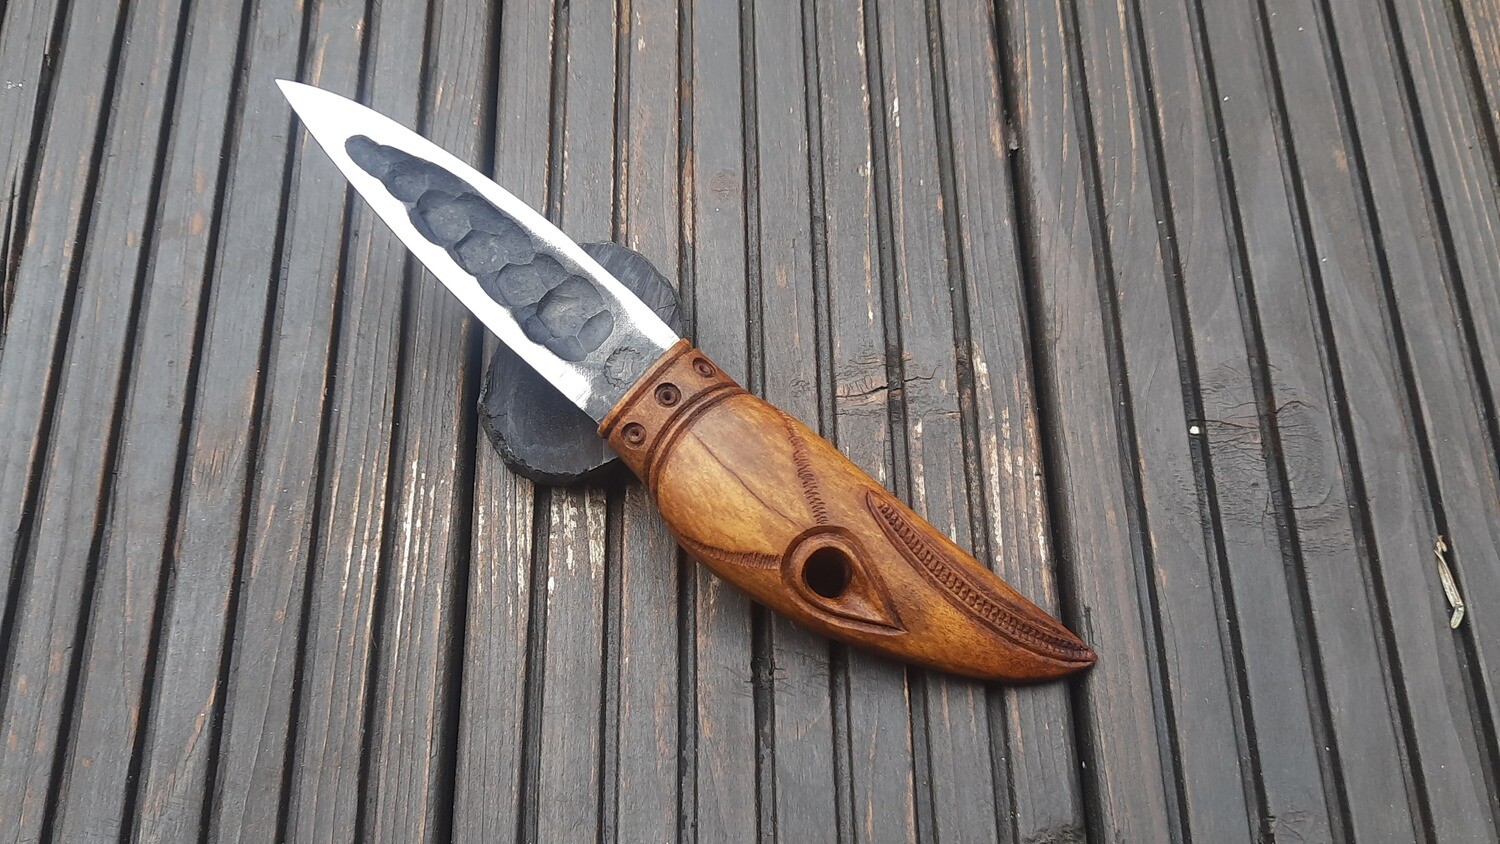 Small North Knife / Yakut shape Knife with Raven Pattern, Boot Knife, Hand forged Blade, Antlers Carved Handle